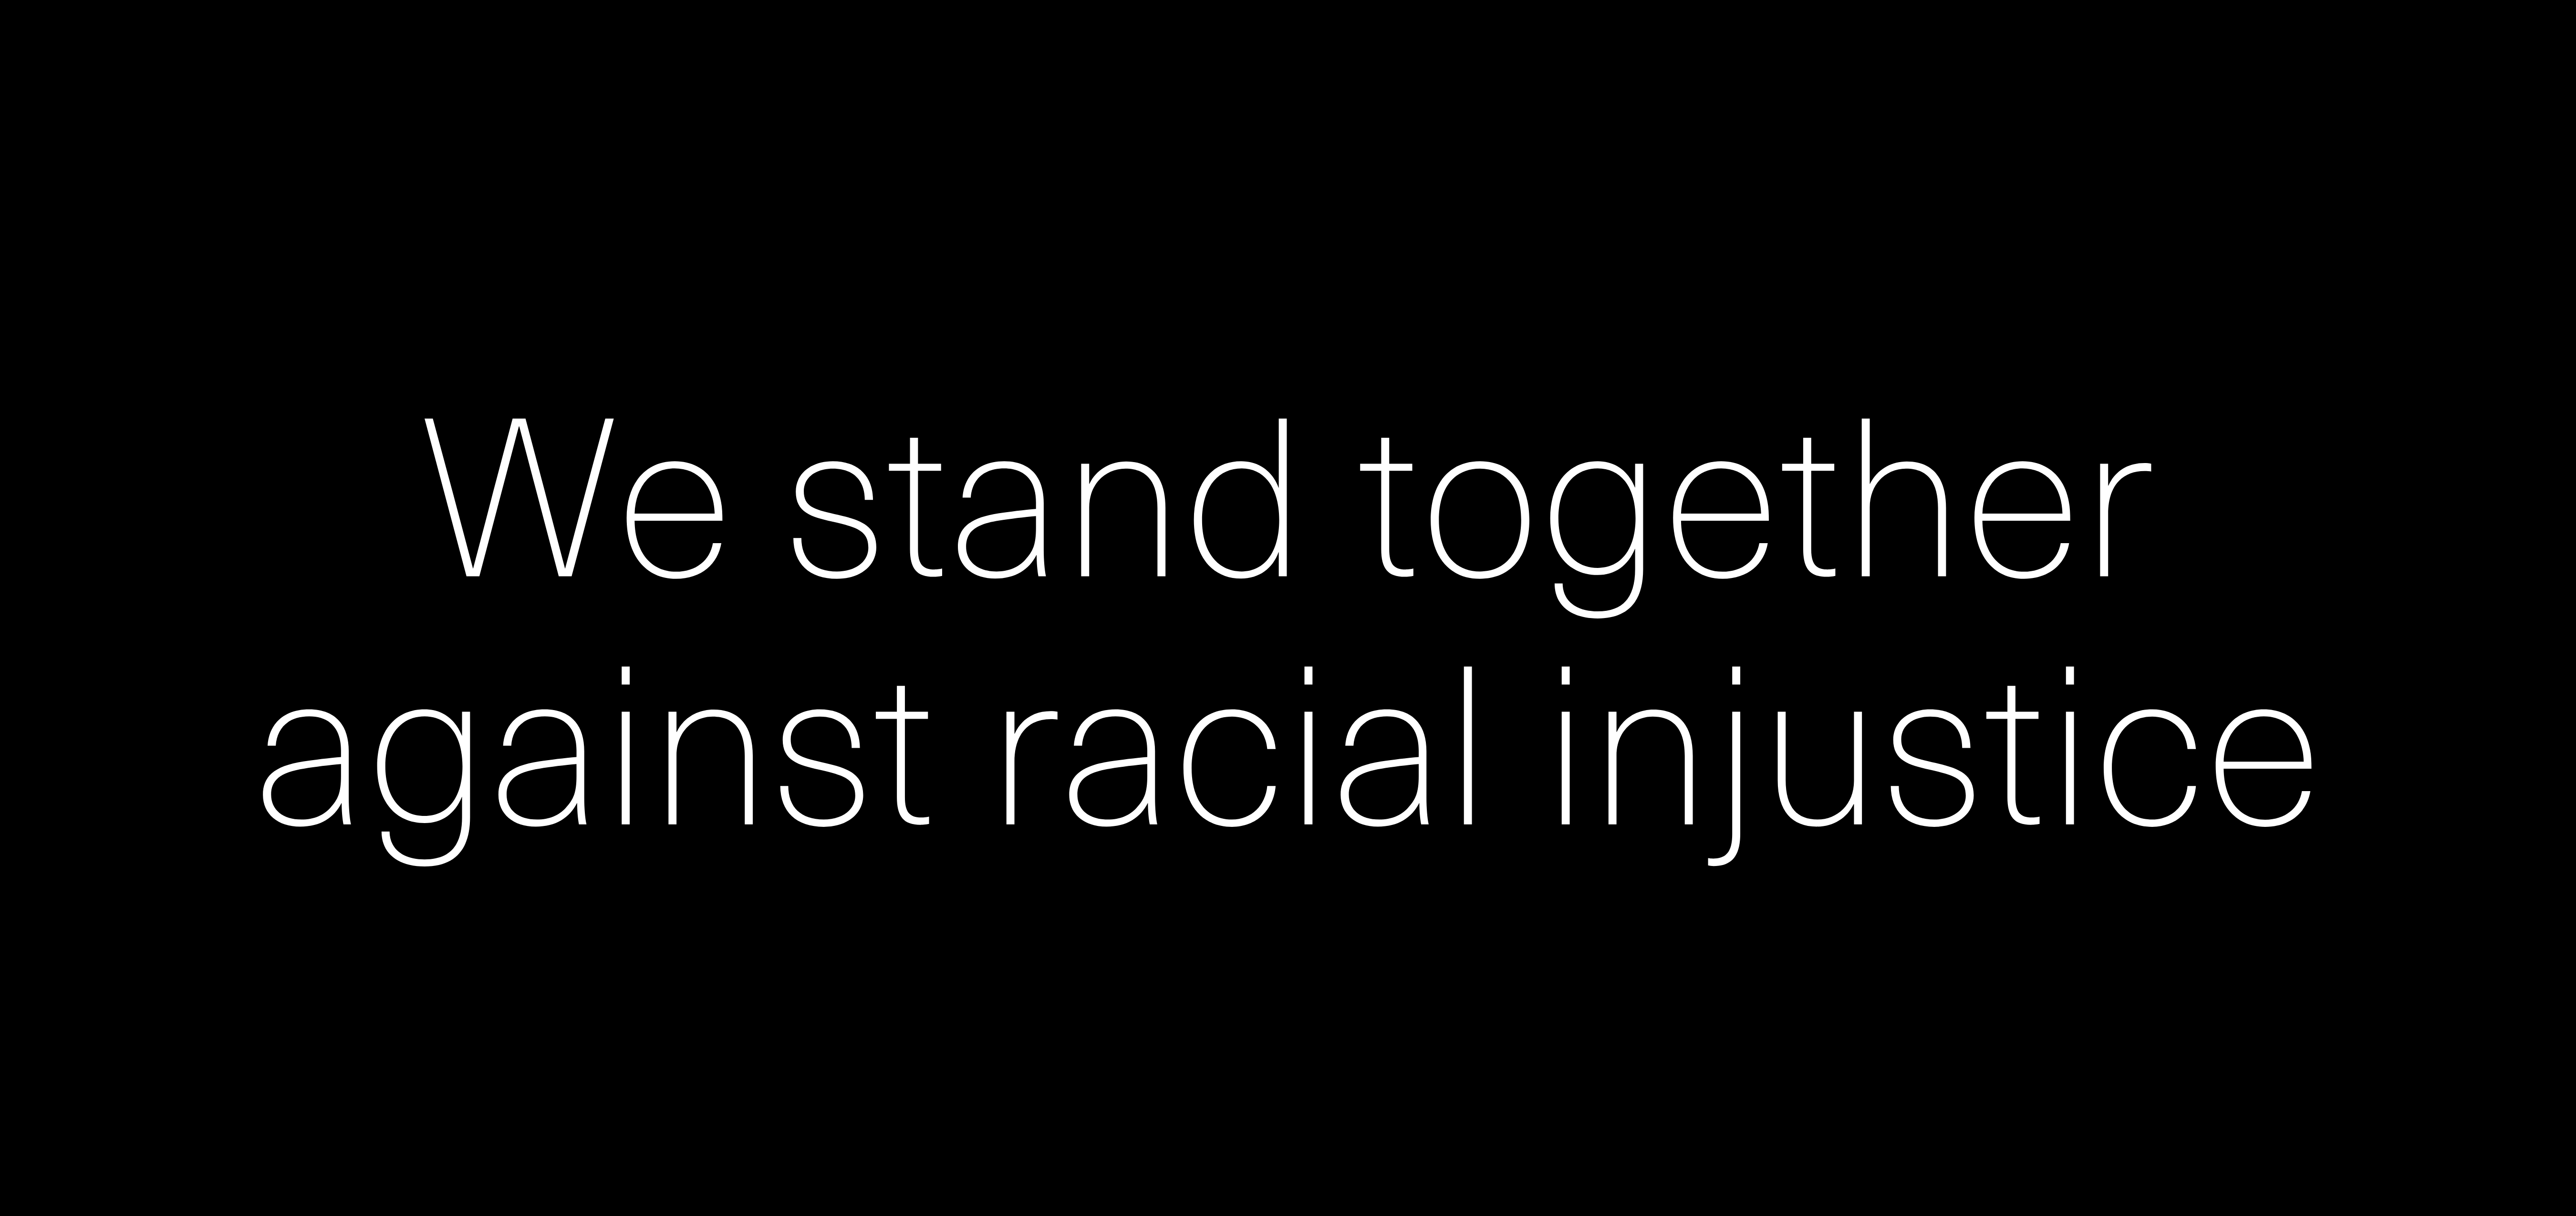 We stand together against racial injustice